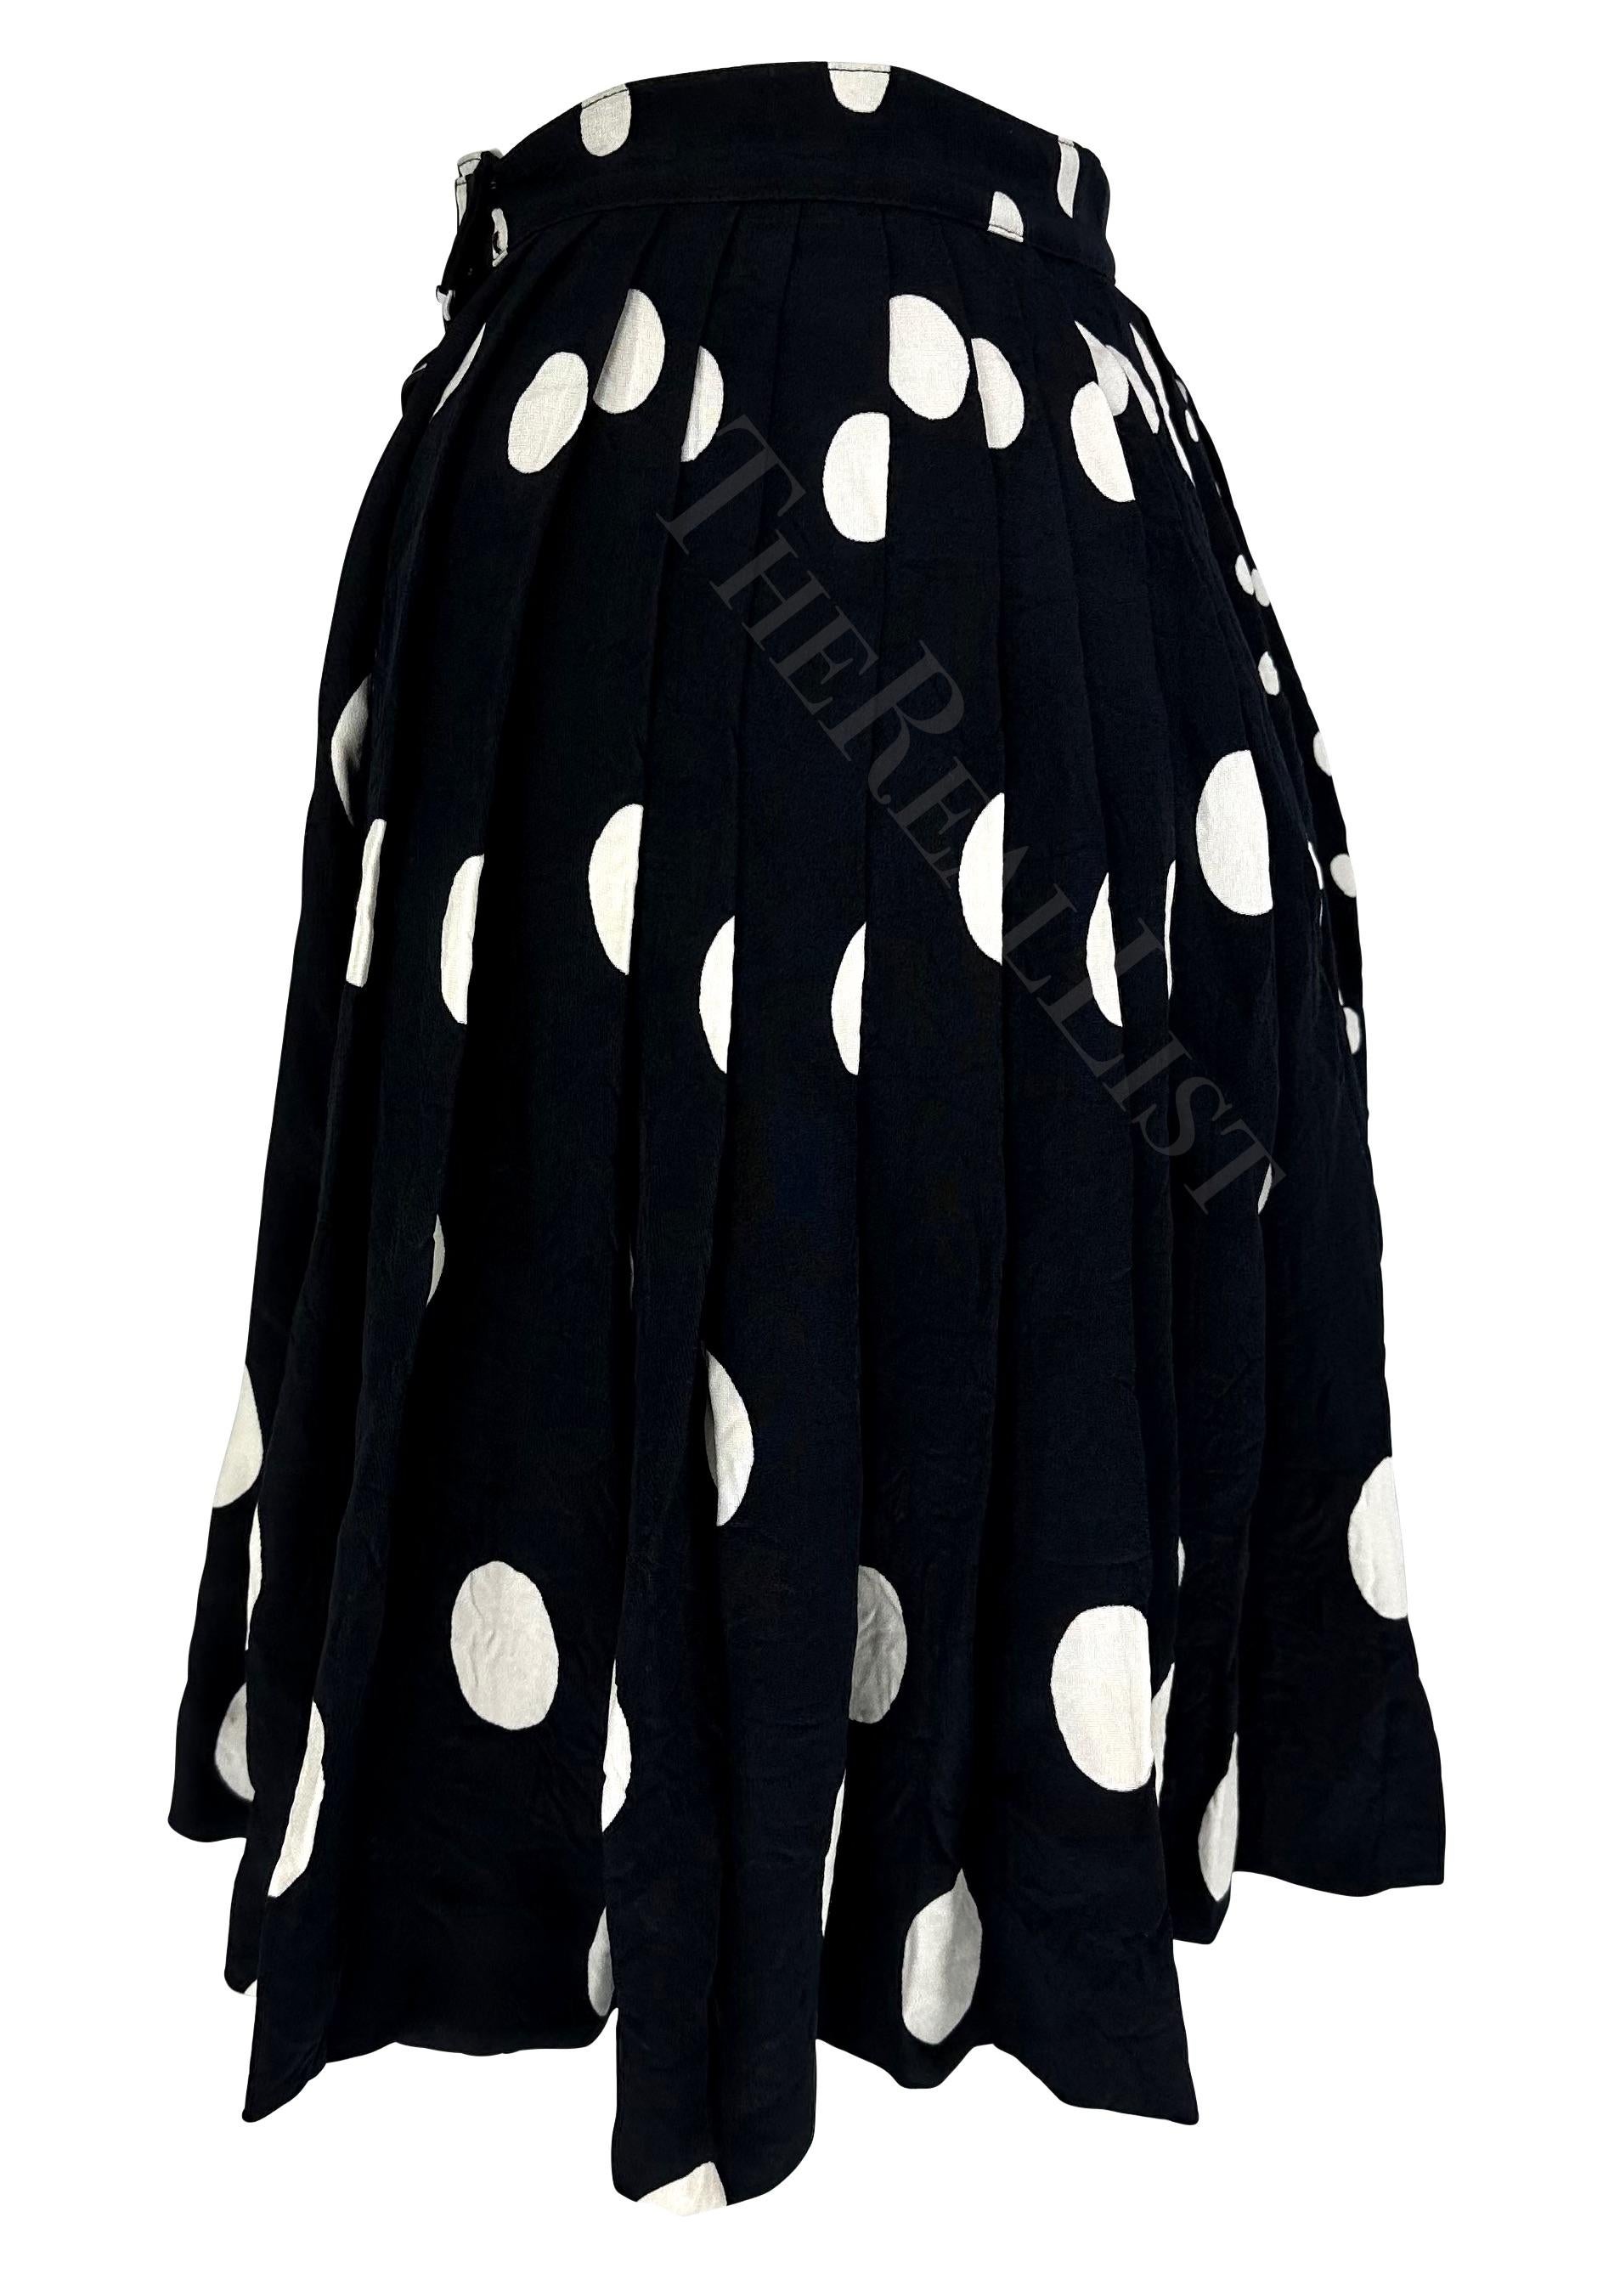 NWT S/S 1994 Gianni Versace Black White Polka Dot Pleated Wrap Skirt In Excellent Condition For Sale In West Hollywood, CA